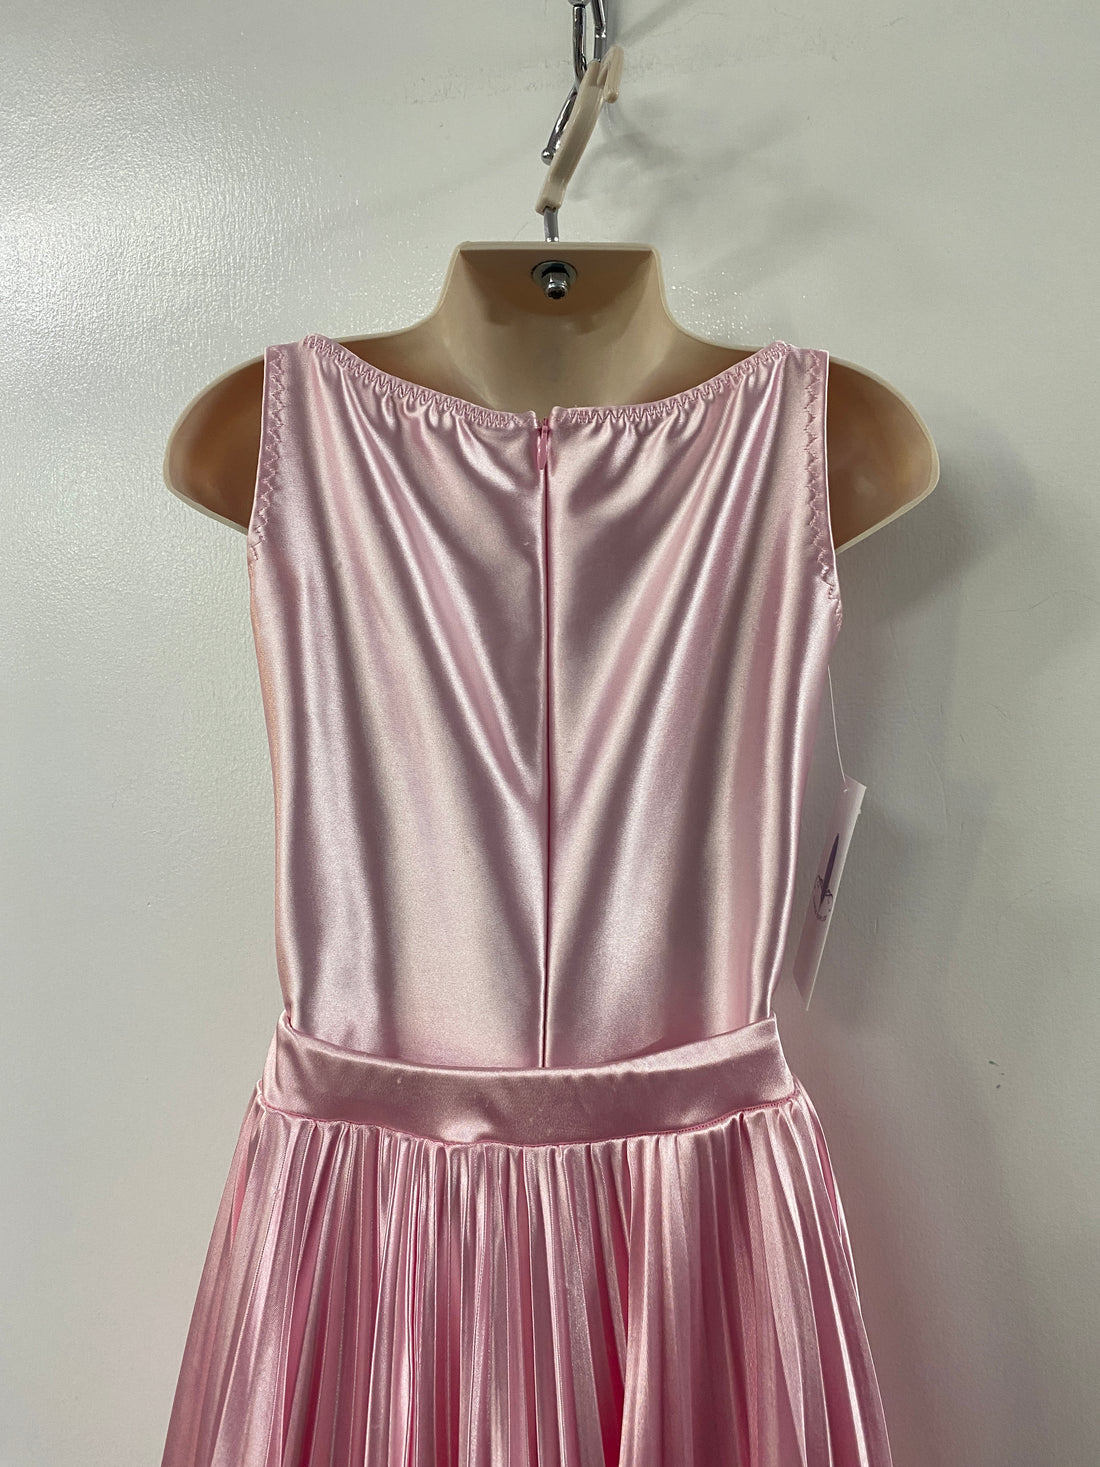 Pre Loved 3 Piece Juvenile Dress in Baby Pink (Size 10-12)